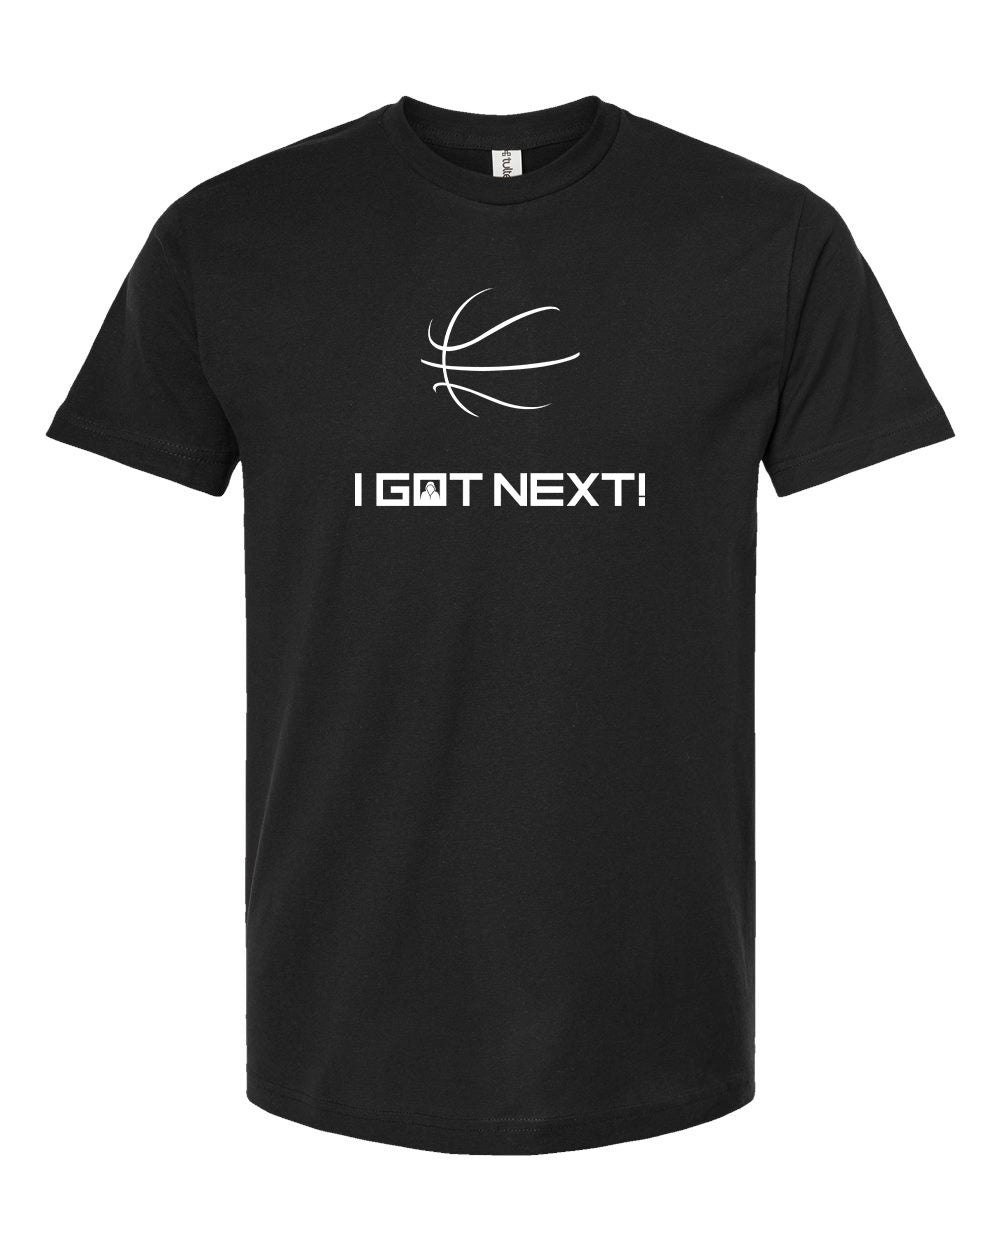 Disal Custom Adult Tee "I Got Next" - 202 (color options available)